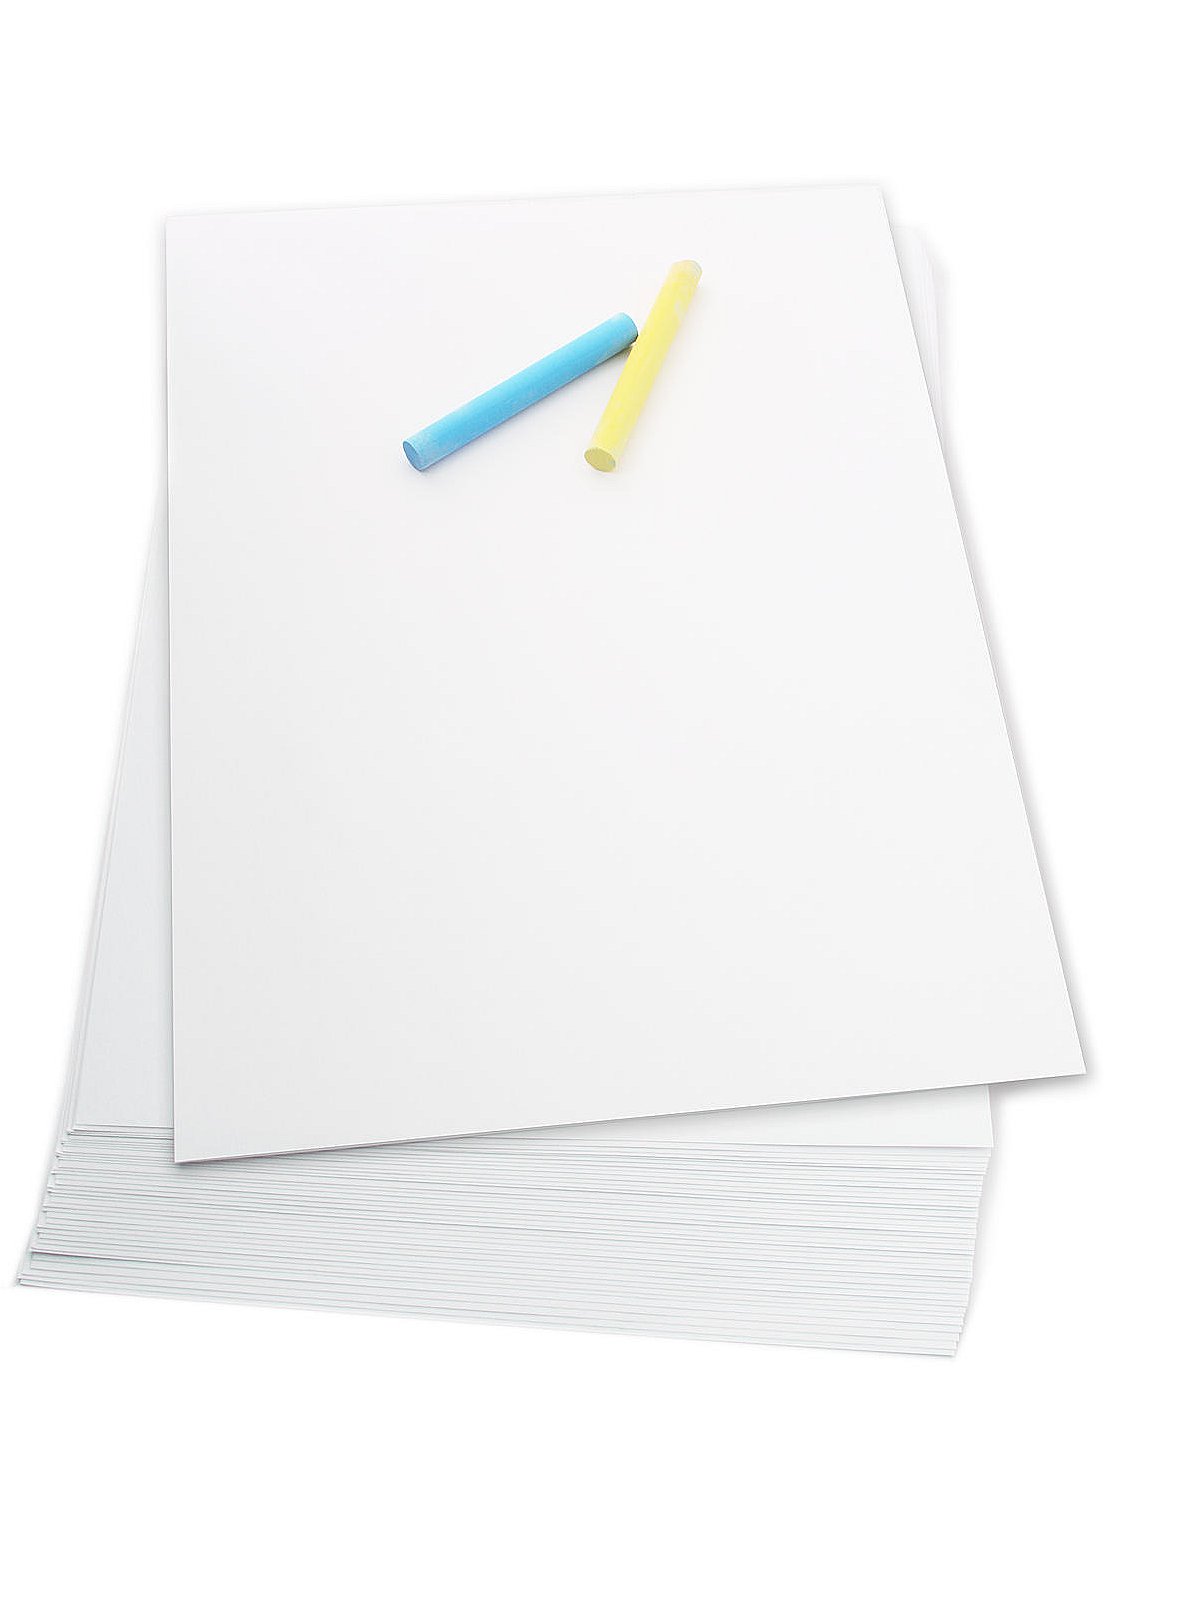 Pacon Doodle Pad, White, 9 x 12, 60 Sheets, Pack of 12